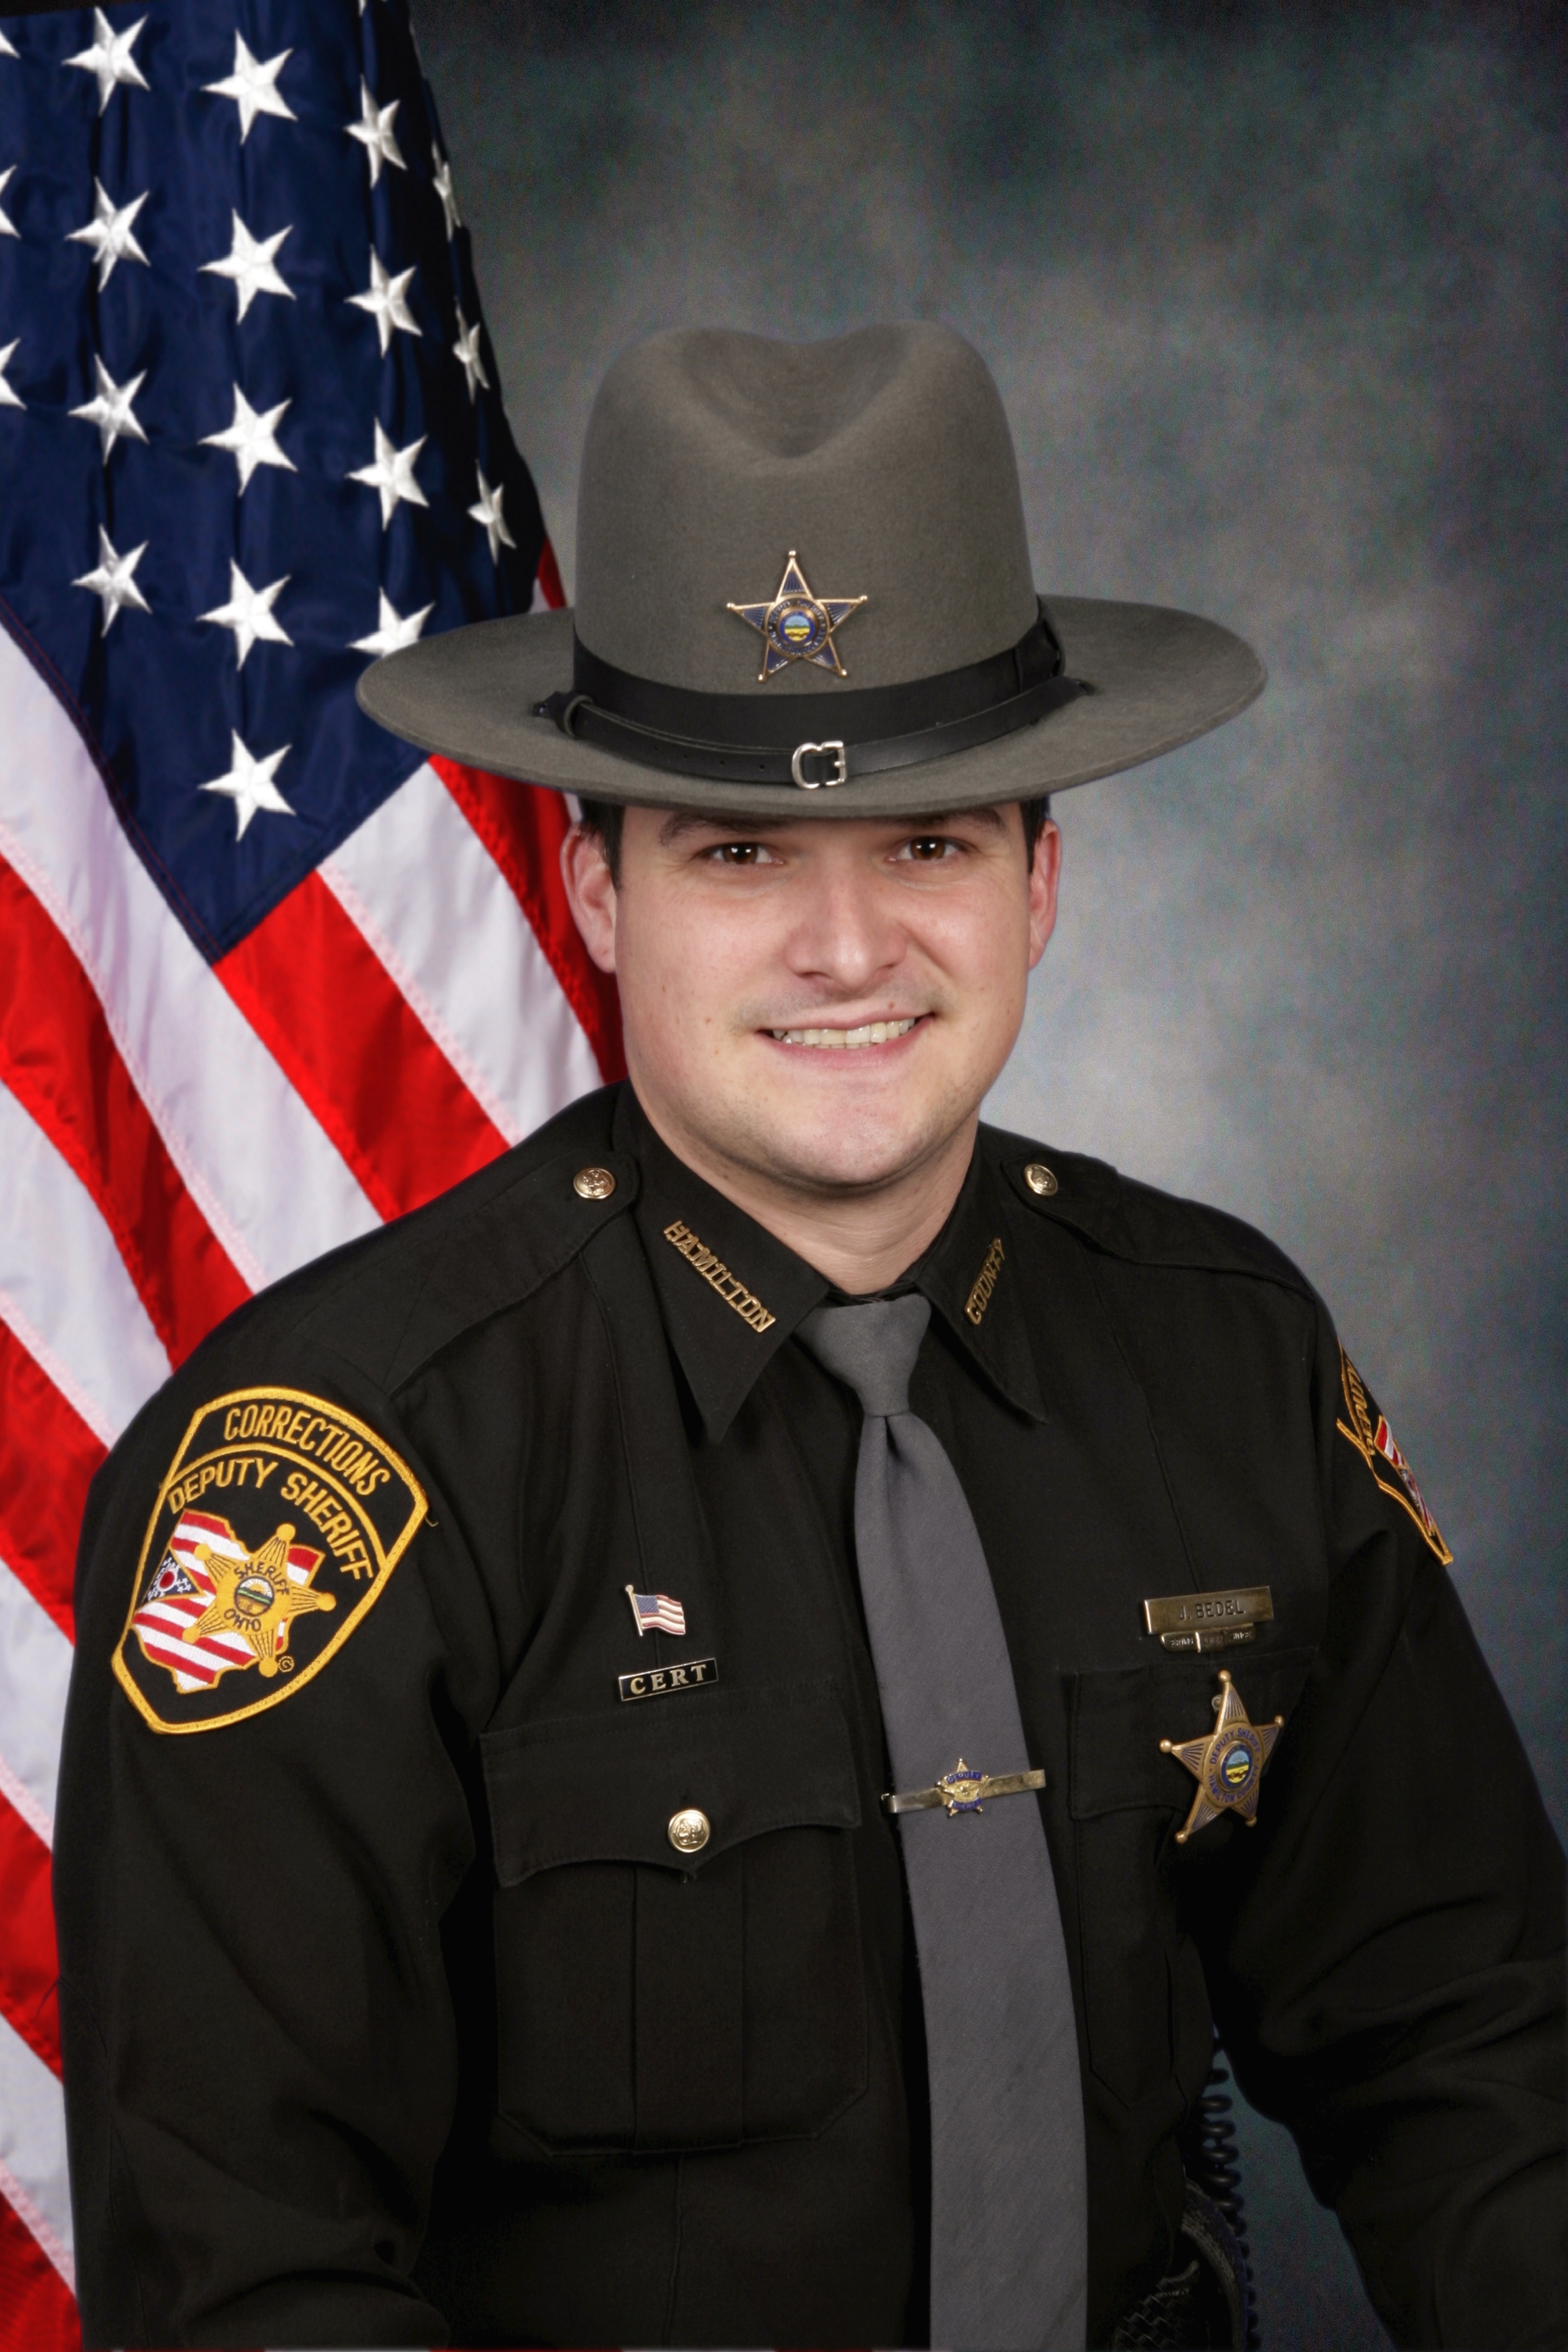 sheriff member with hat.jpg